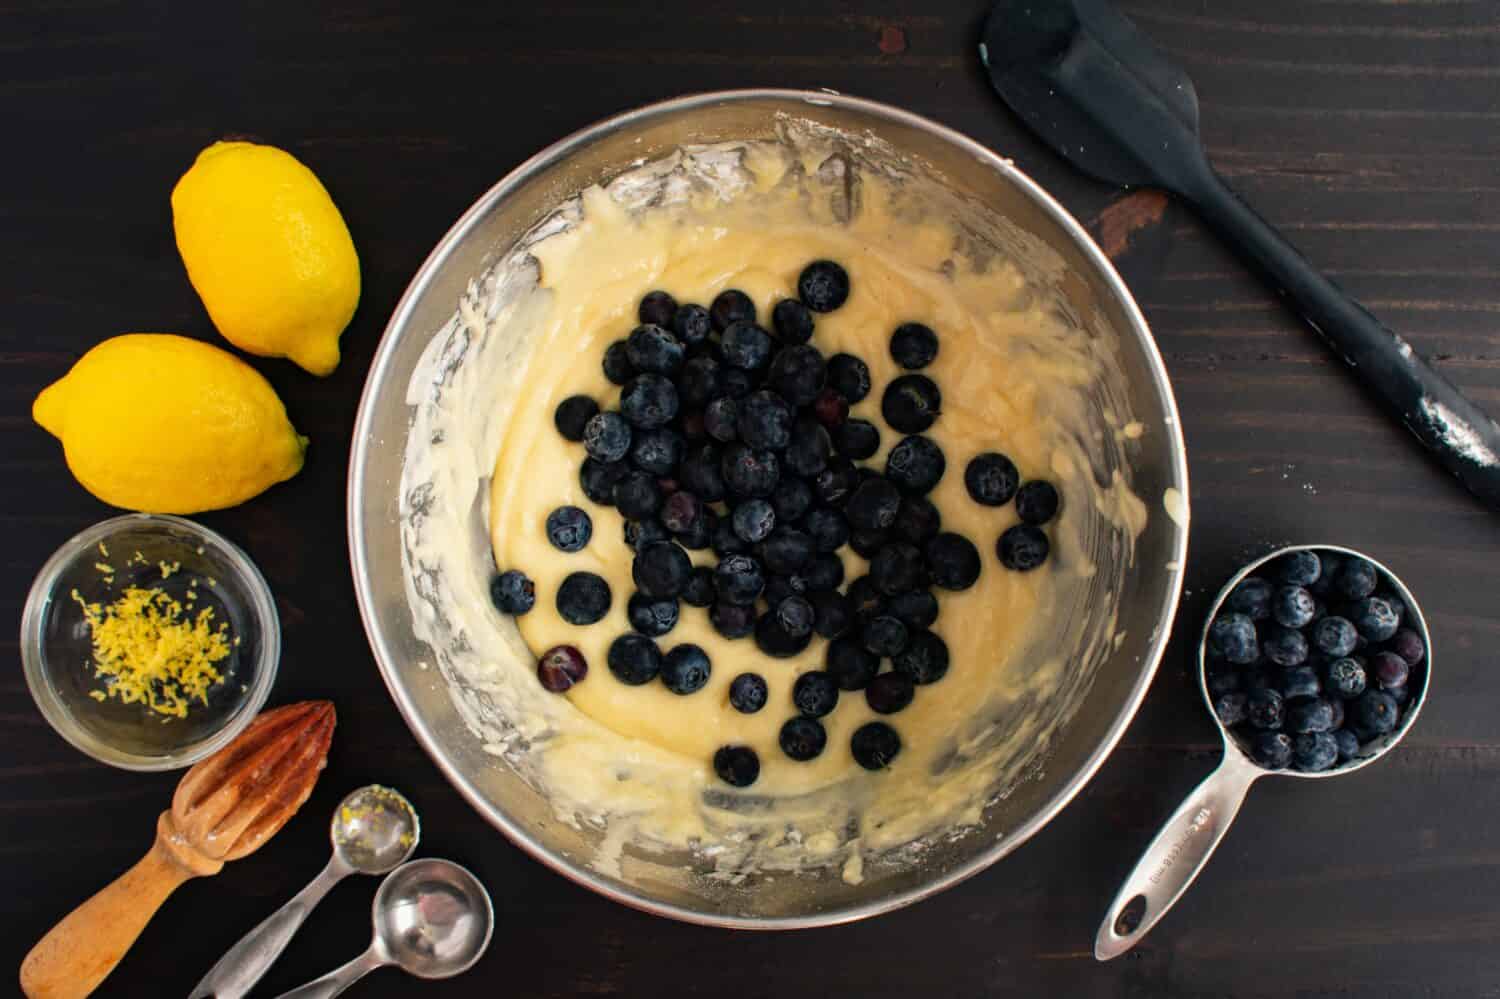 Mixing Bowl Filled with Muffin Batter and Fresh Blueberries: Bowl of blueberry muffin batter surrounded by fresh ingredients and kitchen utensils